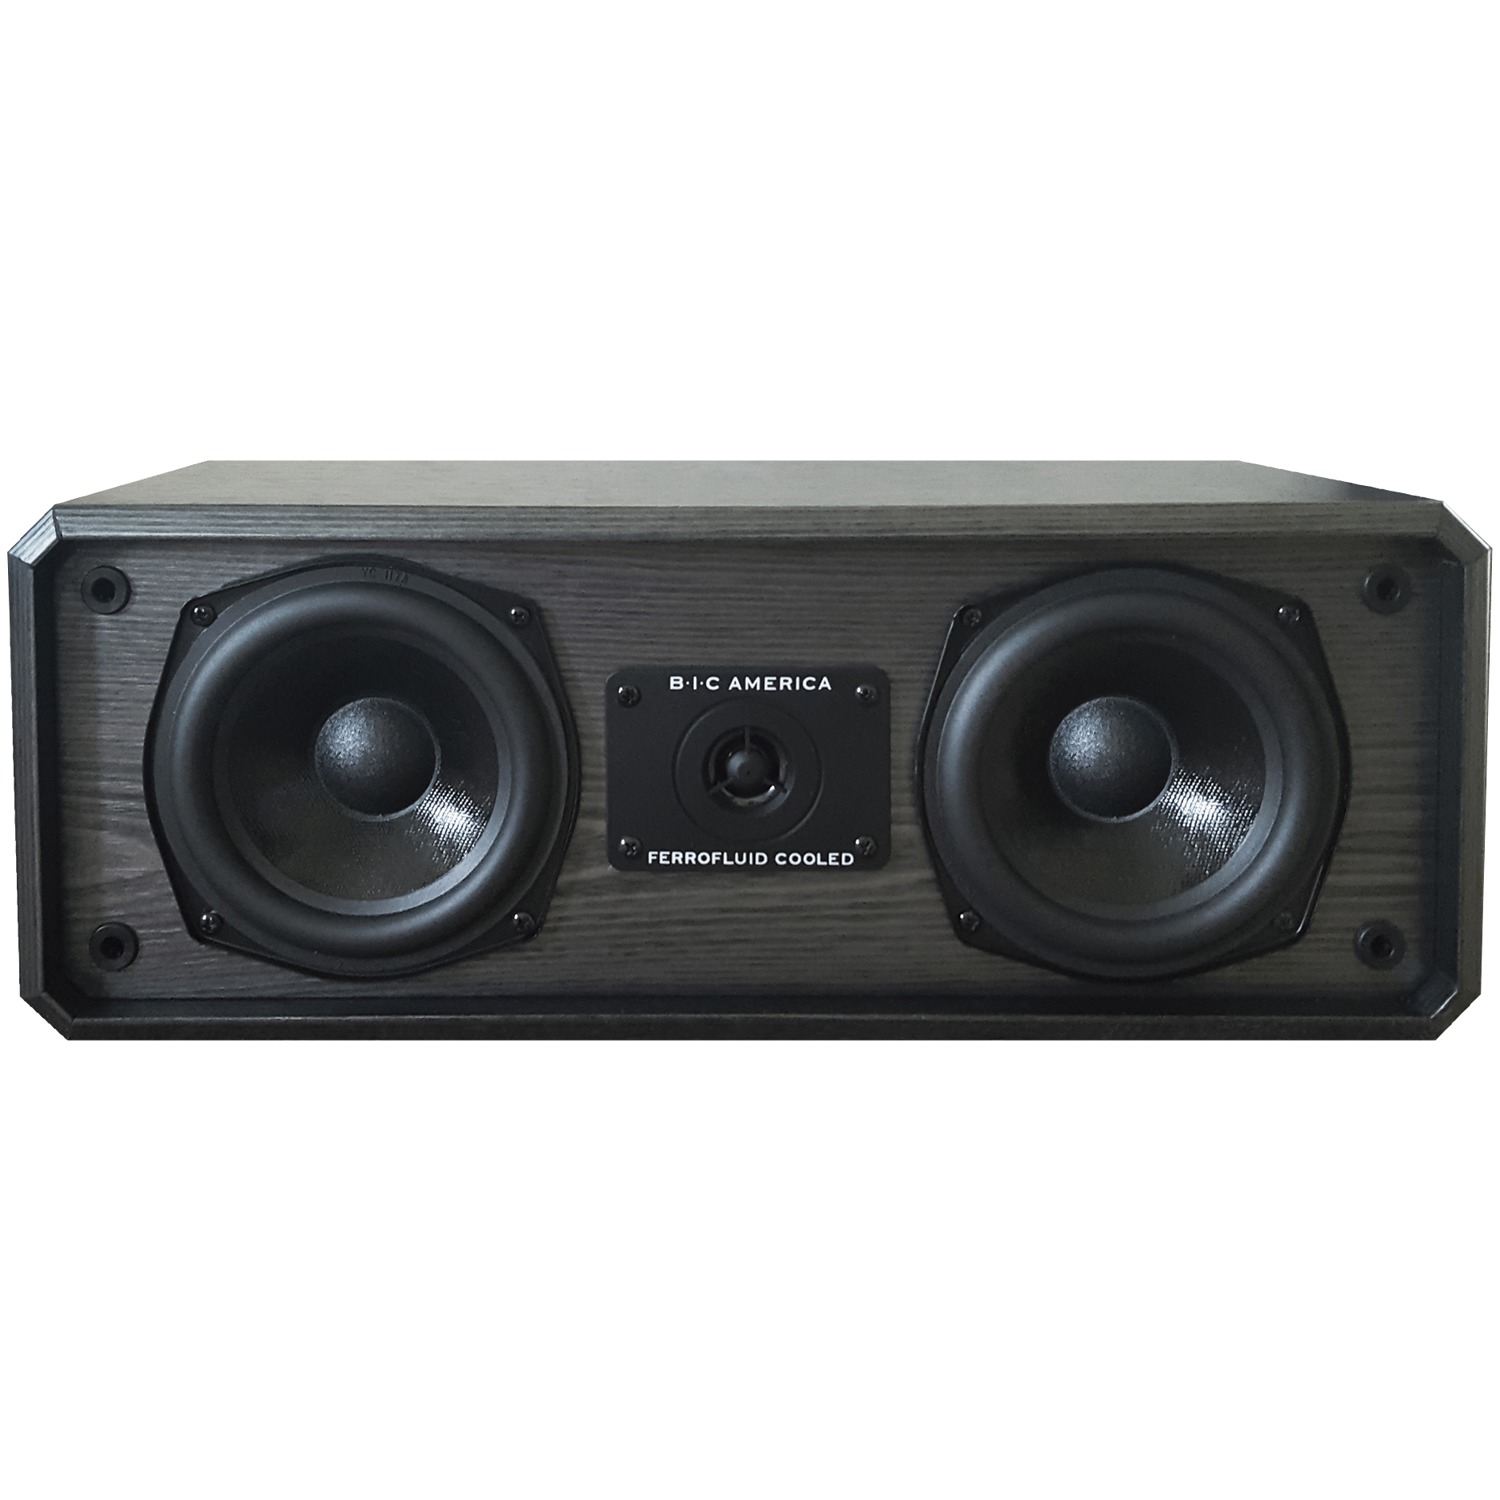 BIC America 2-Way 3-Driver Center-Channel Speaker (5.25 Inch, 125 Watts) - image 5 of 6